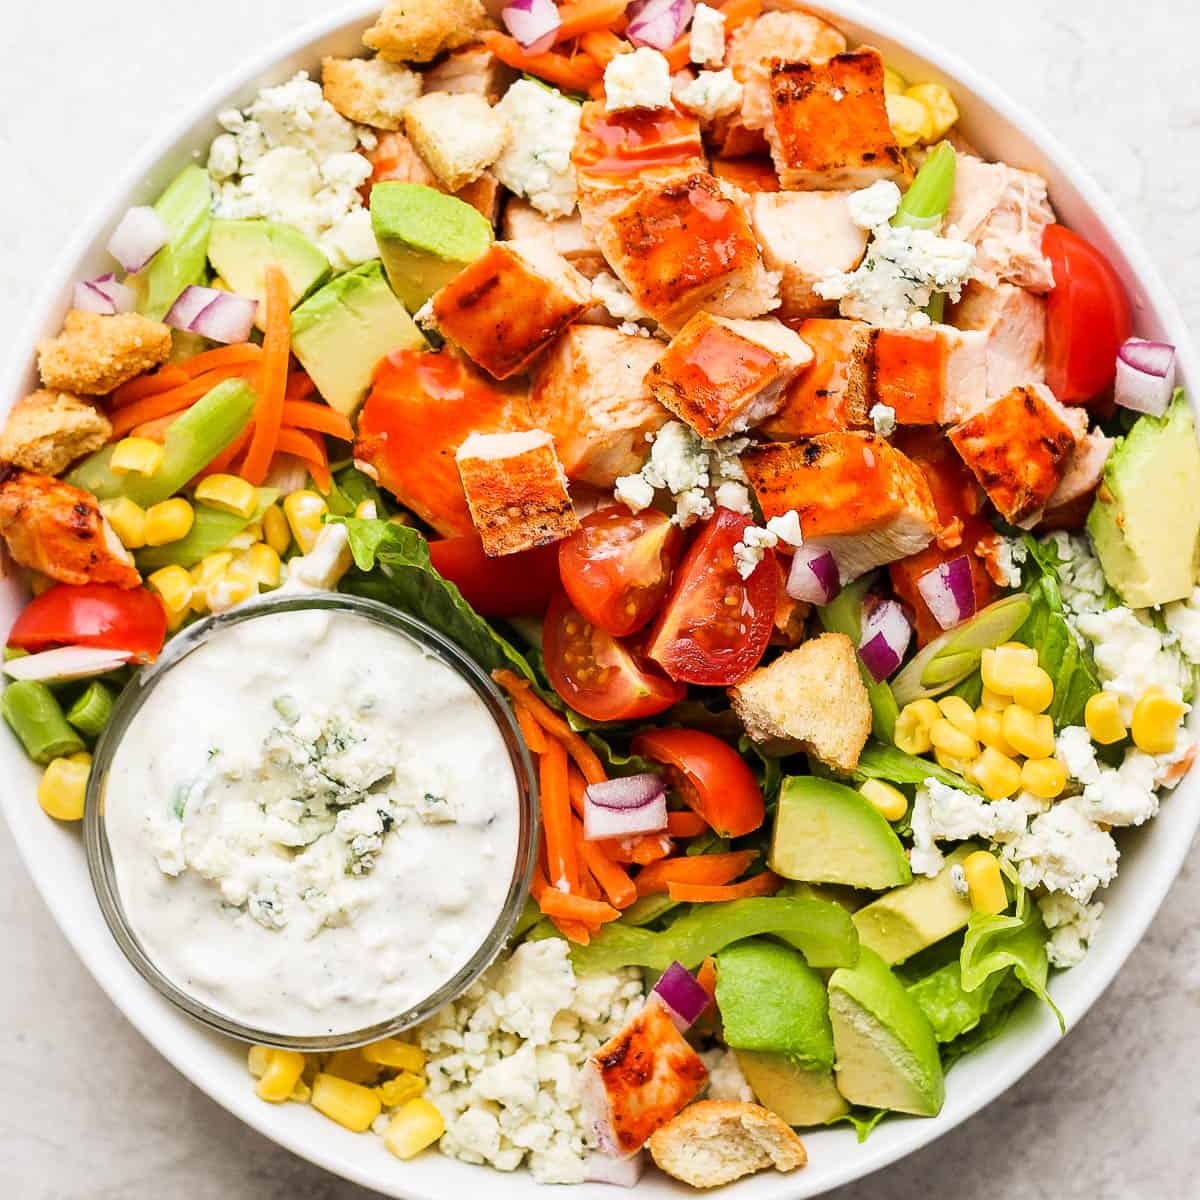 Big bowl of buffalo chicken salad with a cup of blue cheese dressing.